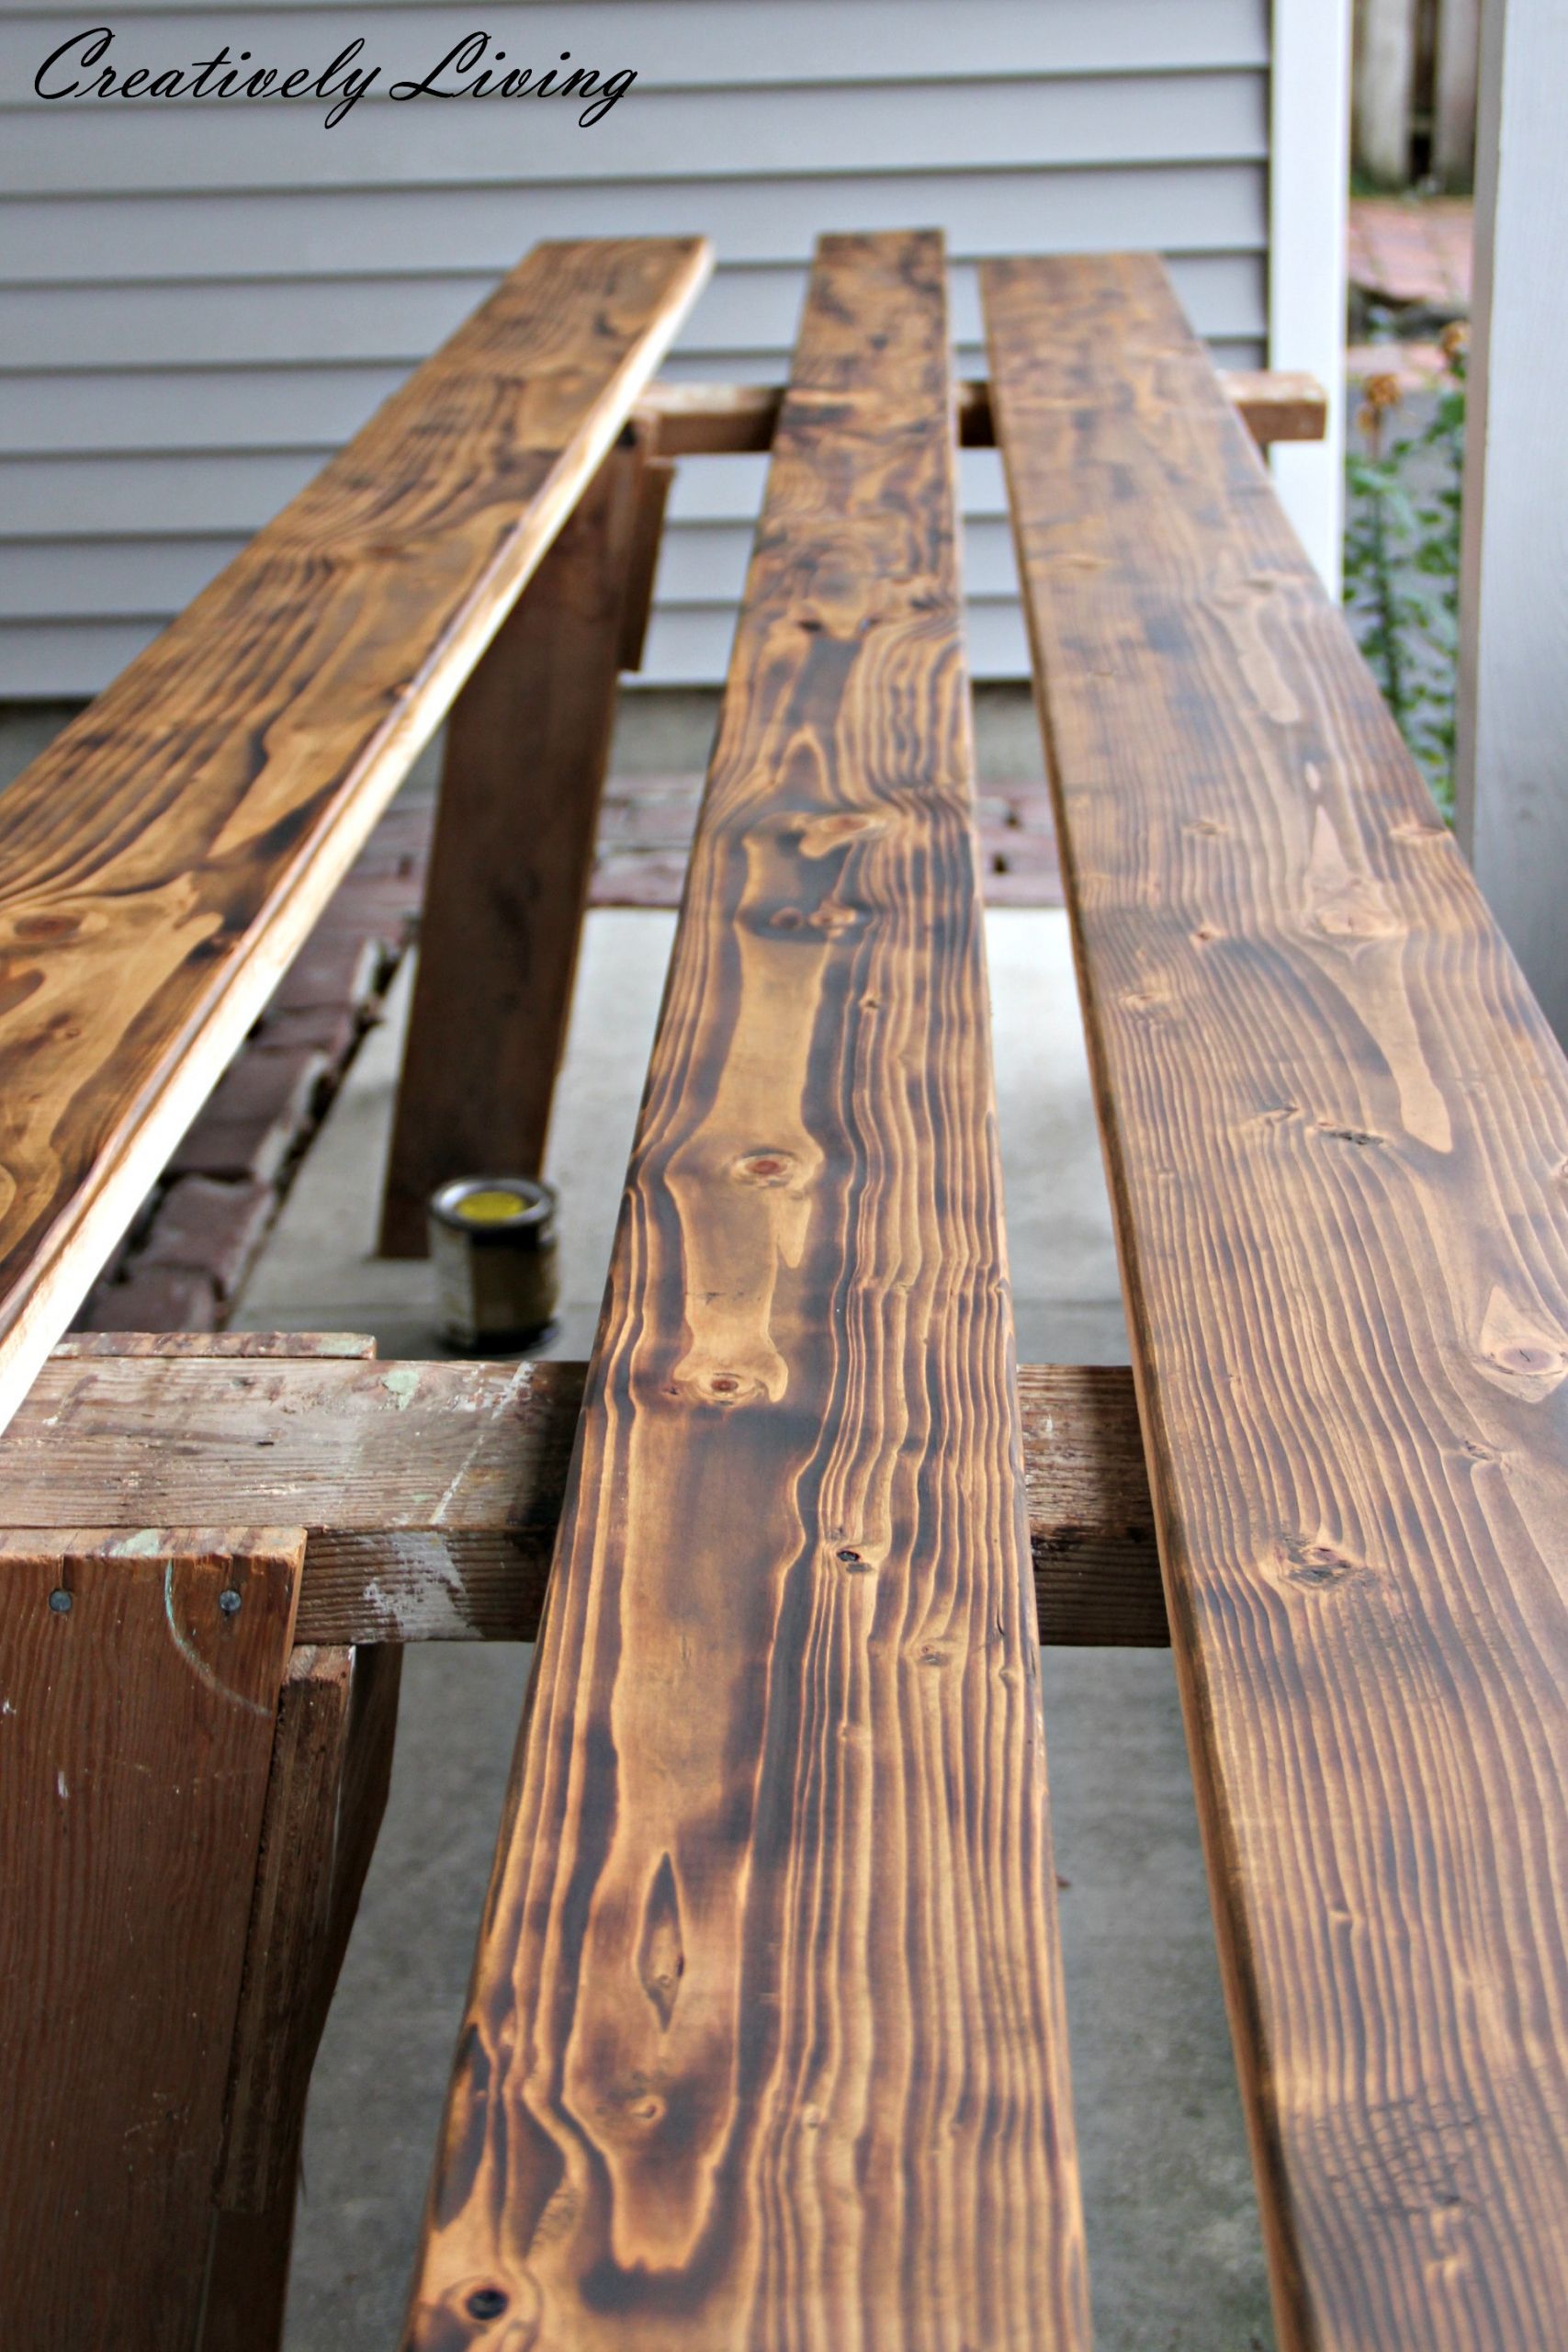 DIY Wood Plank Countertops
 Torched DIY Rustic Wood Counter Top for Under $50 by